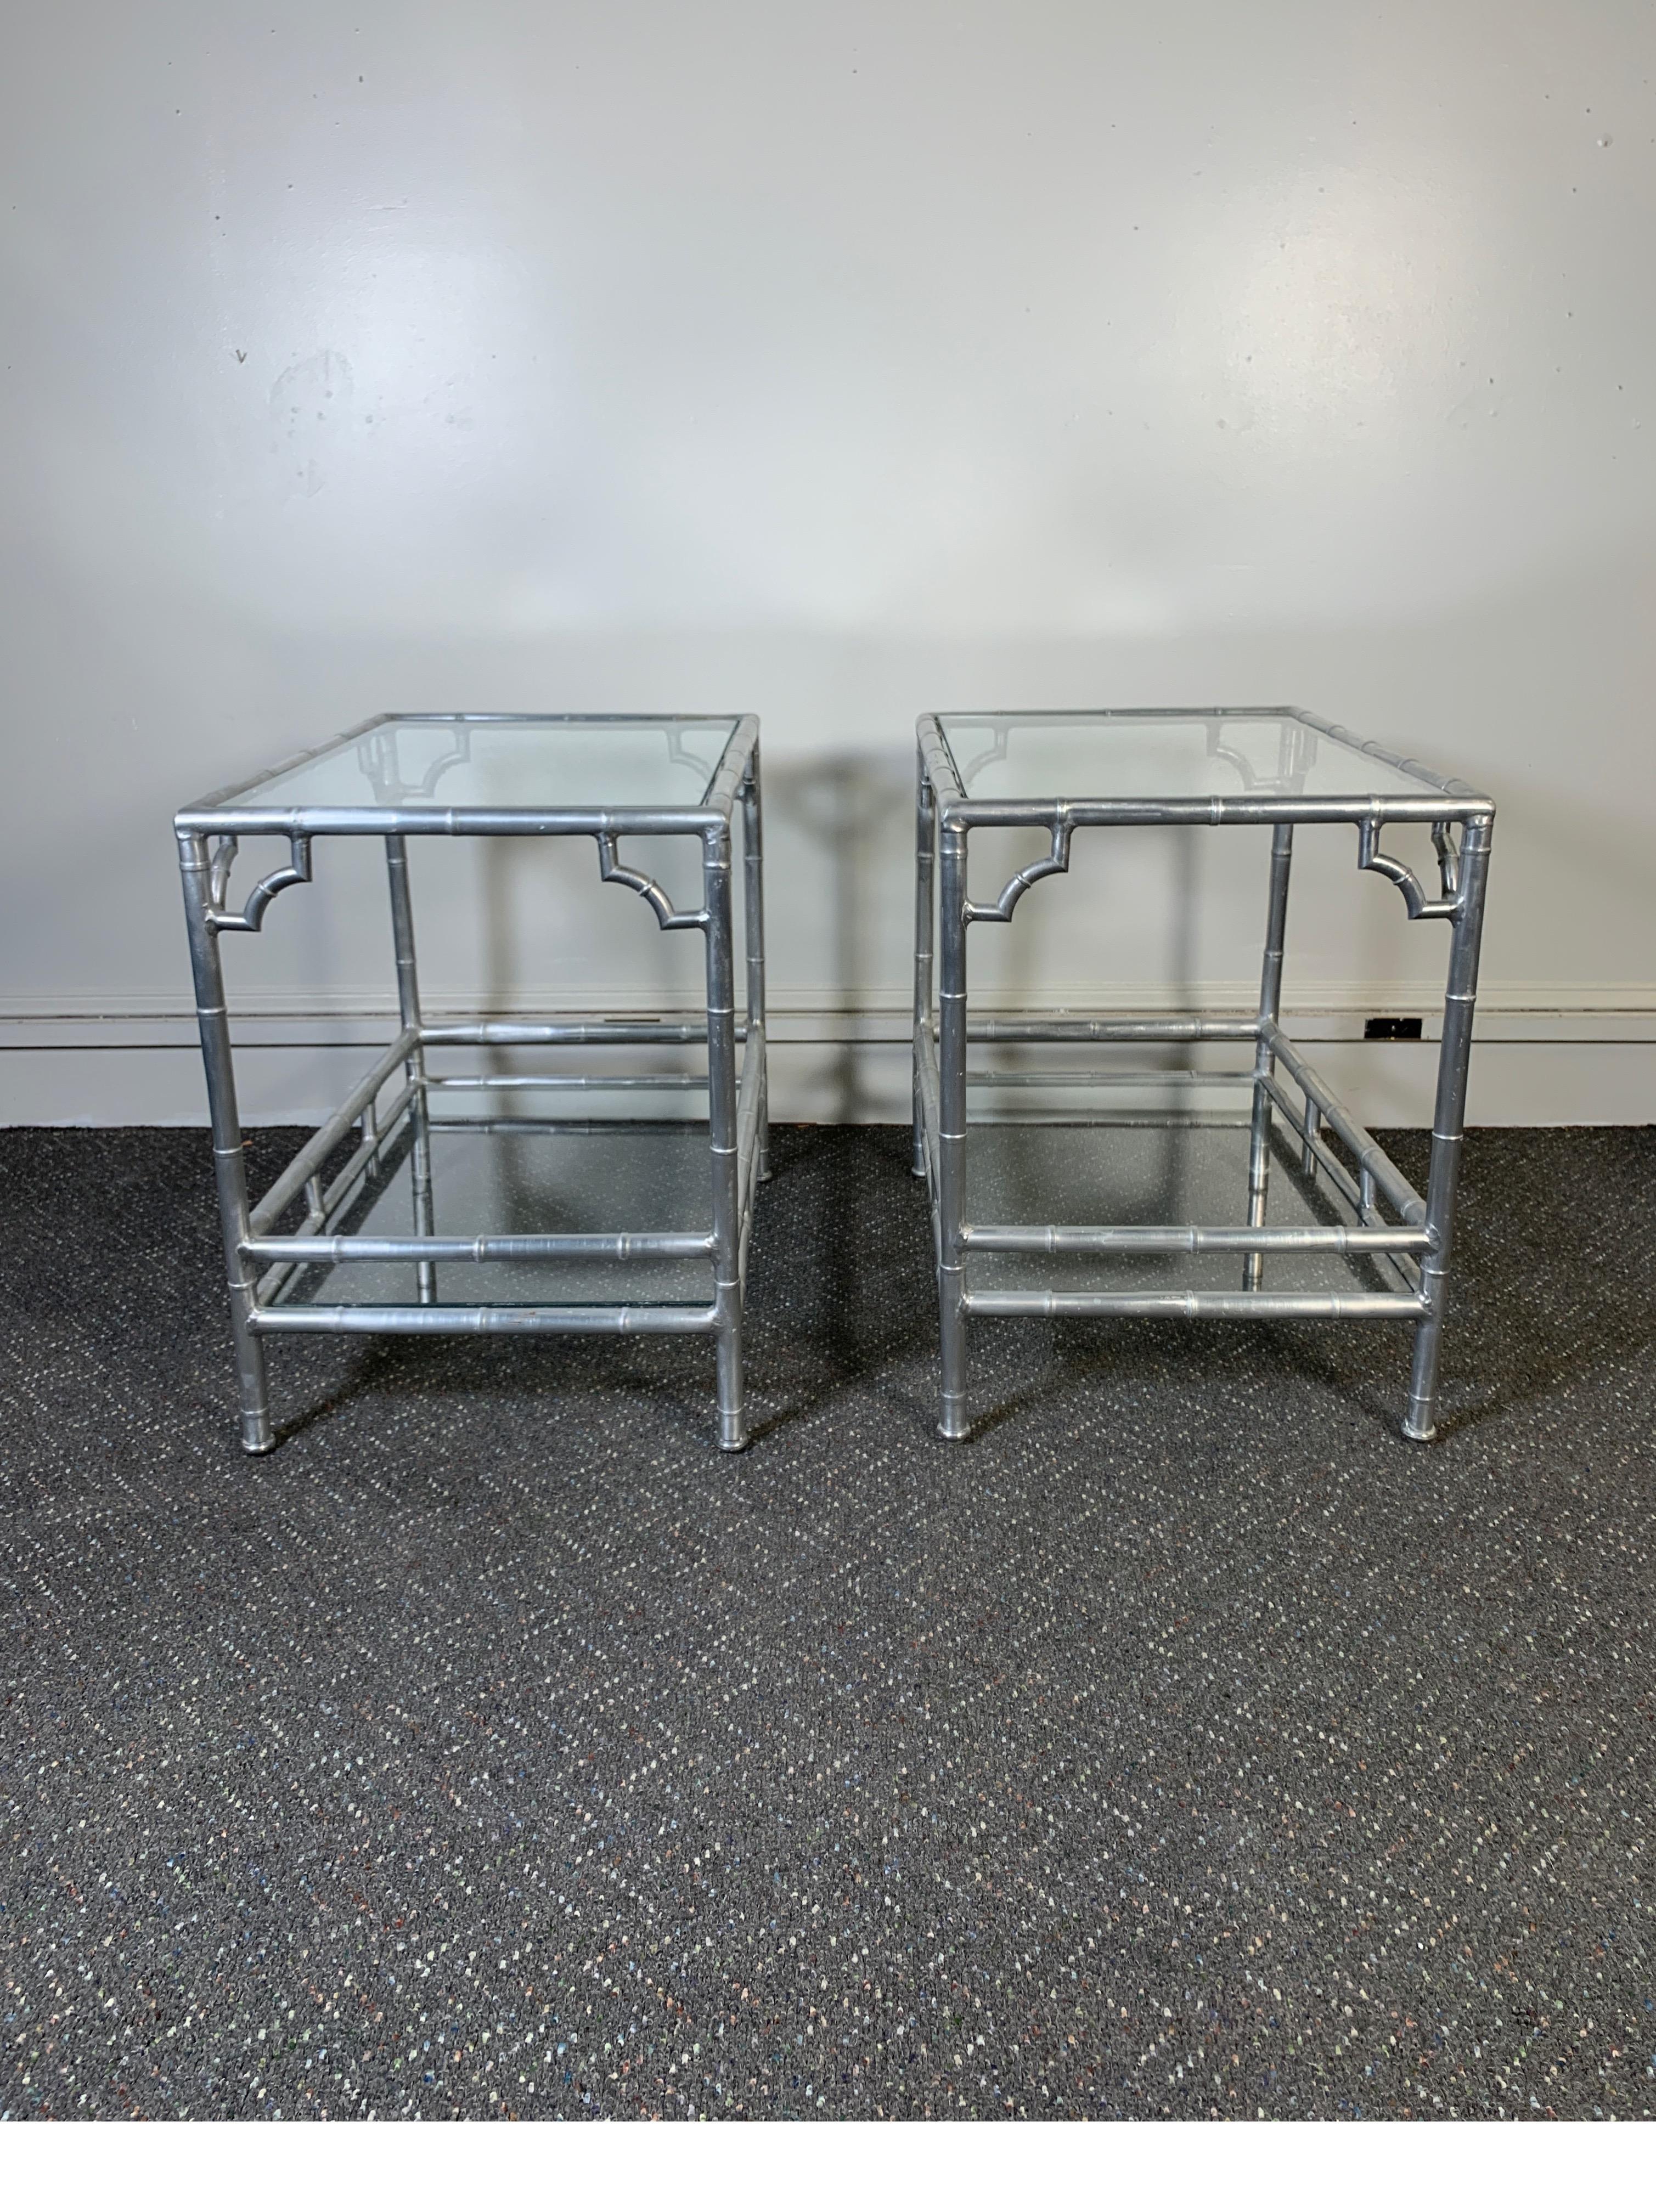 Pair of midcentury 1960s-1970s aluminum faux bamboo side tables with glass shelves.
Very good original condition
Dimensions: 26